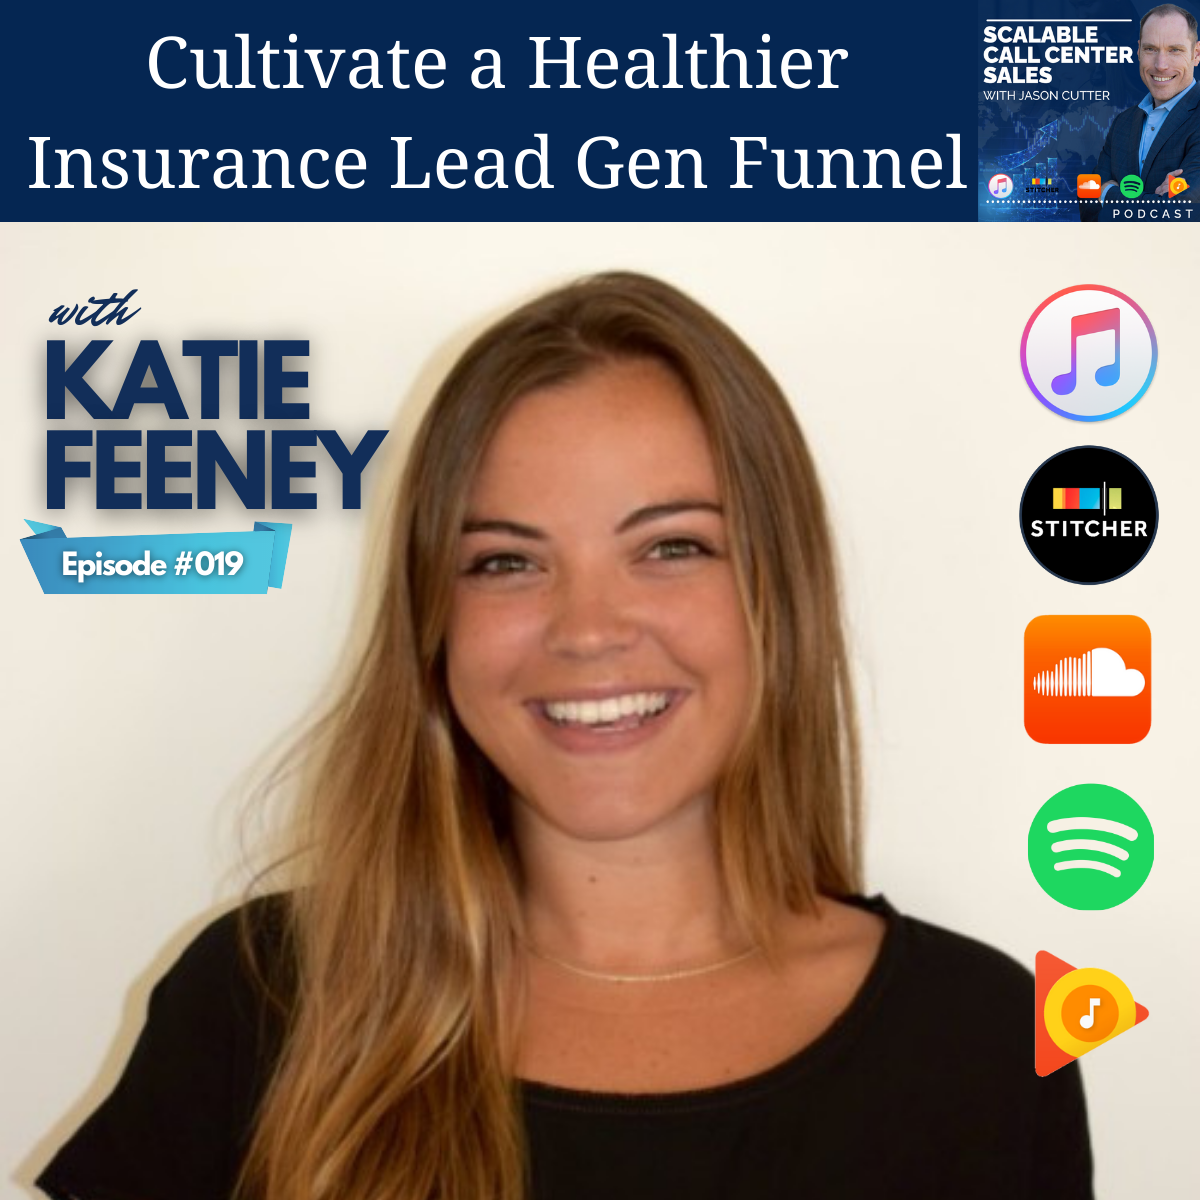 [019] Cultivate a Healthier Insurance Lead Gen Funnel, with Katie Feeney from Active Prospect